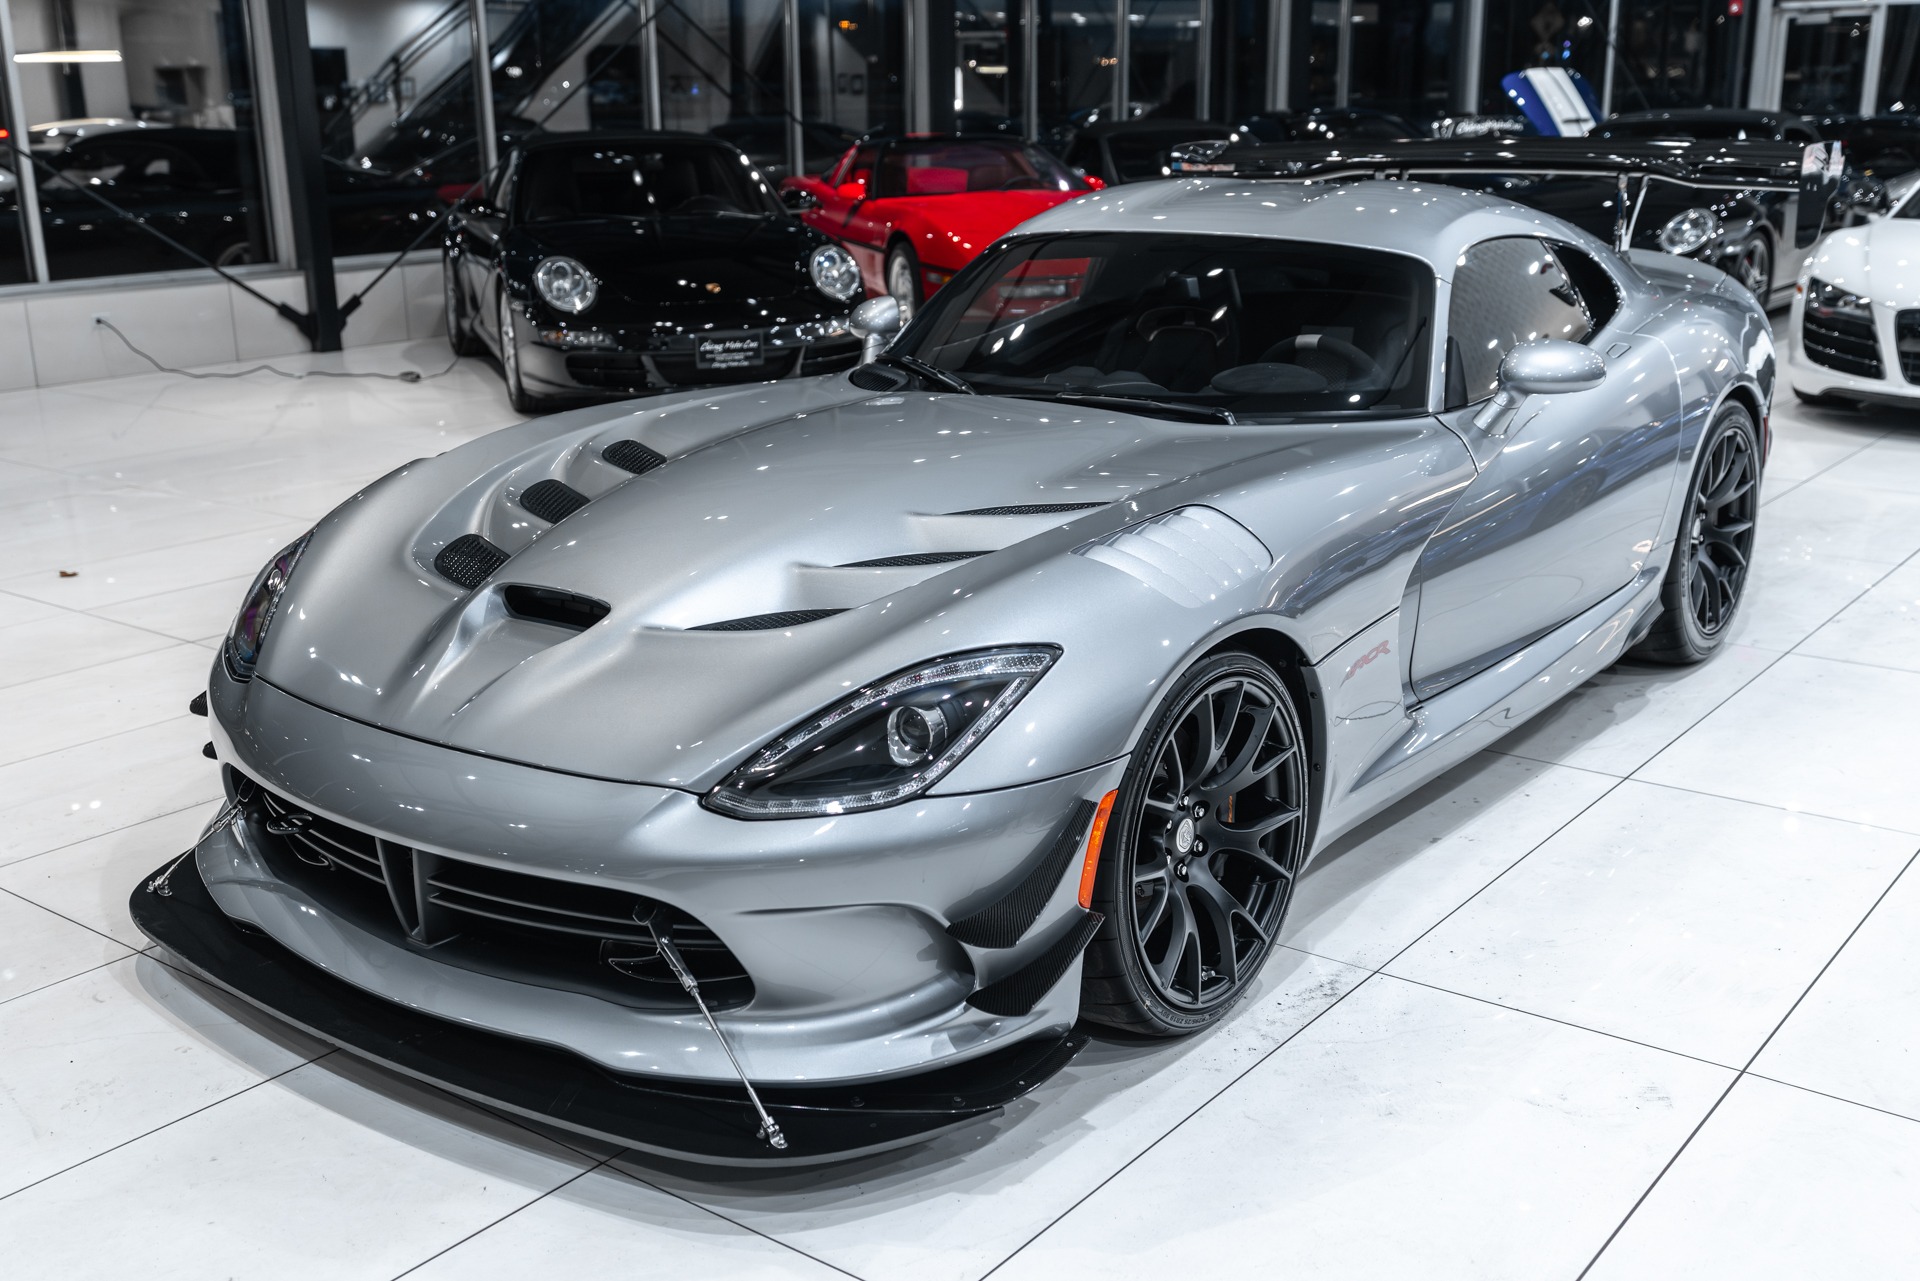 Used-2017-Dodge-Viper-ACR-Extreme-Aero-Coupe-Excellent-Condition-Collector-Car-ONLY-7k-Miles